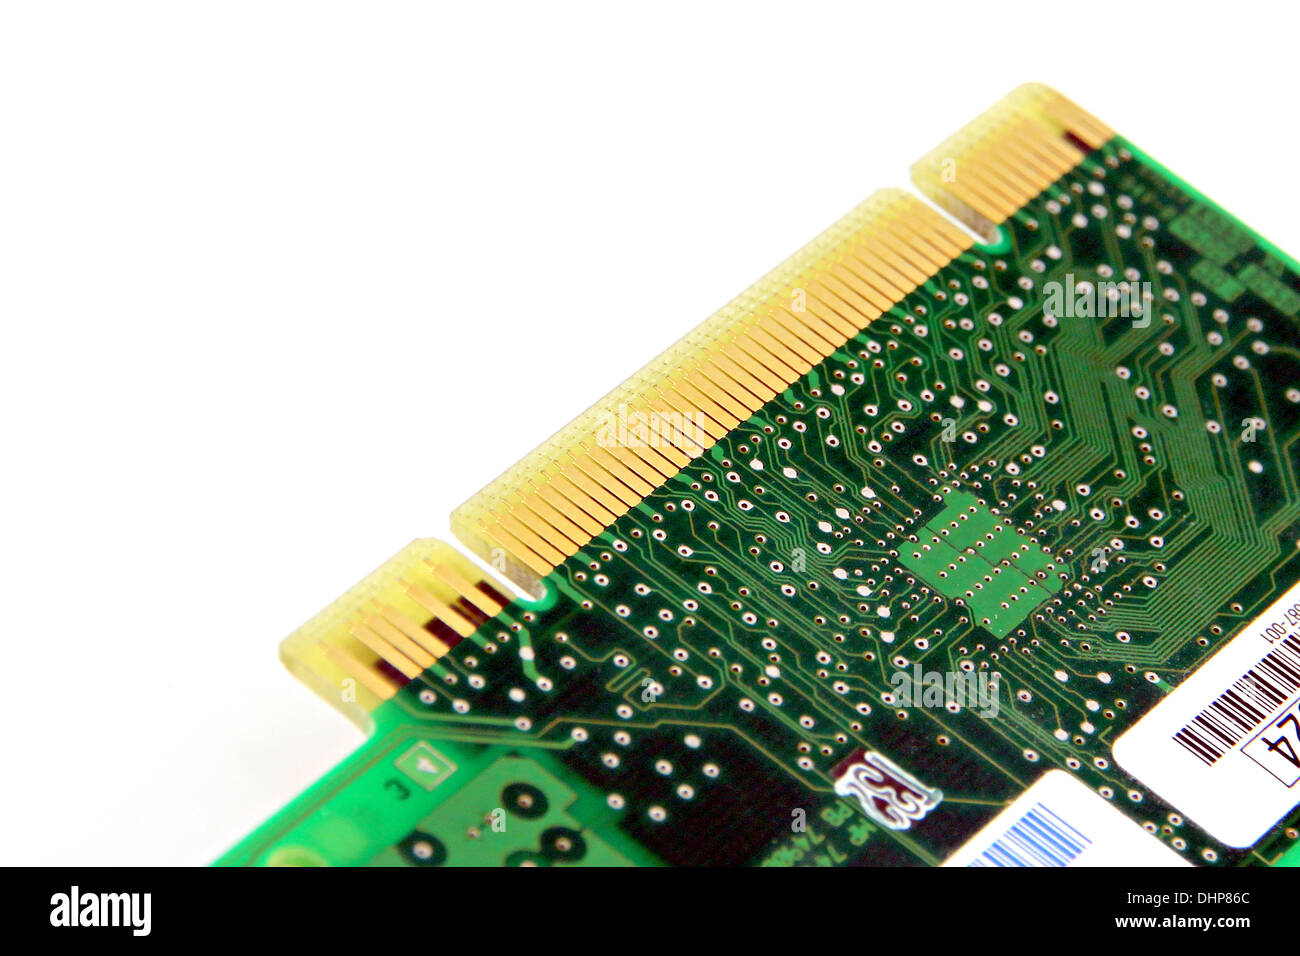 The modem Computer equipment circuit board on white background. Stock Photo